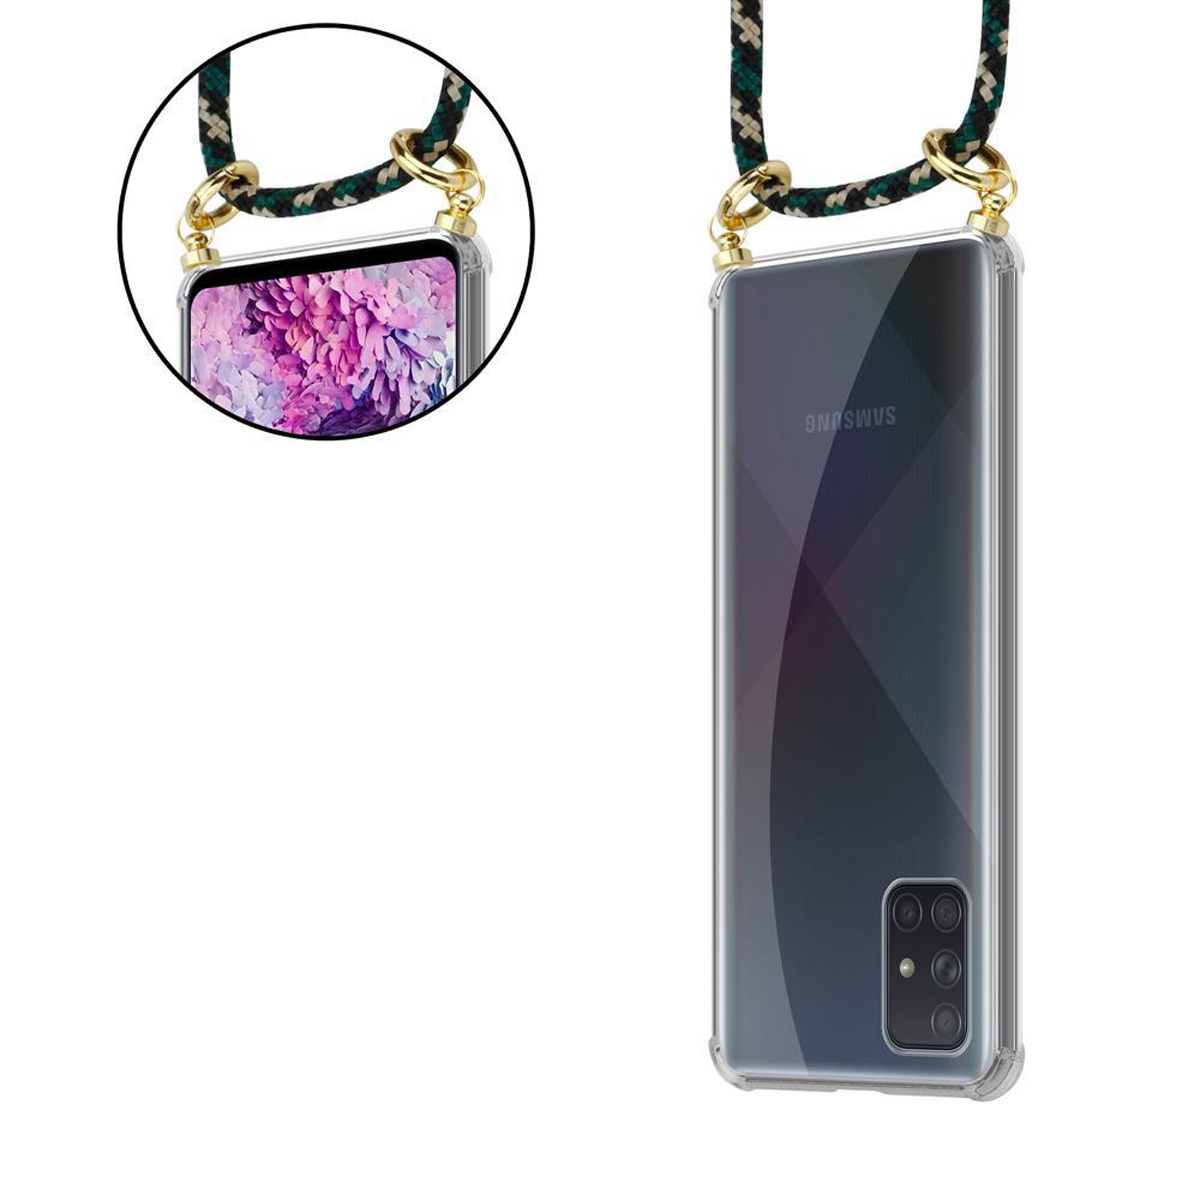 CAMOUFLAGE Backcover, Handy Kordel mit Band CADORABO Samsung, Ringen, Galaxy Hülle, Gold Kette abnehmbarer A71 4G, und